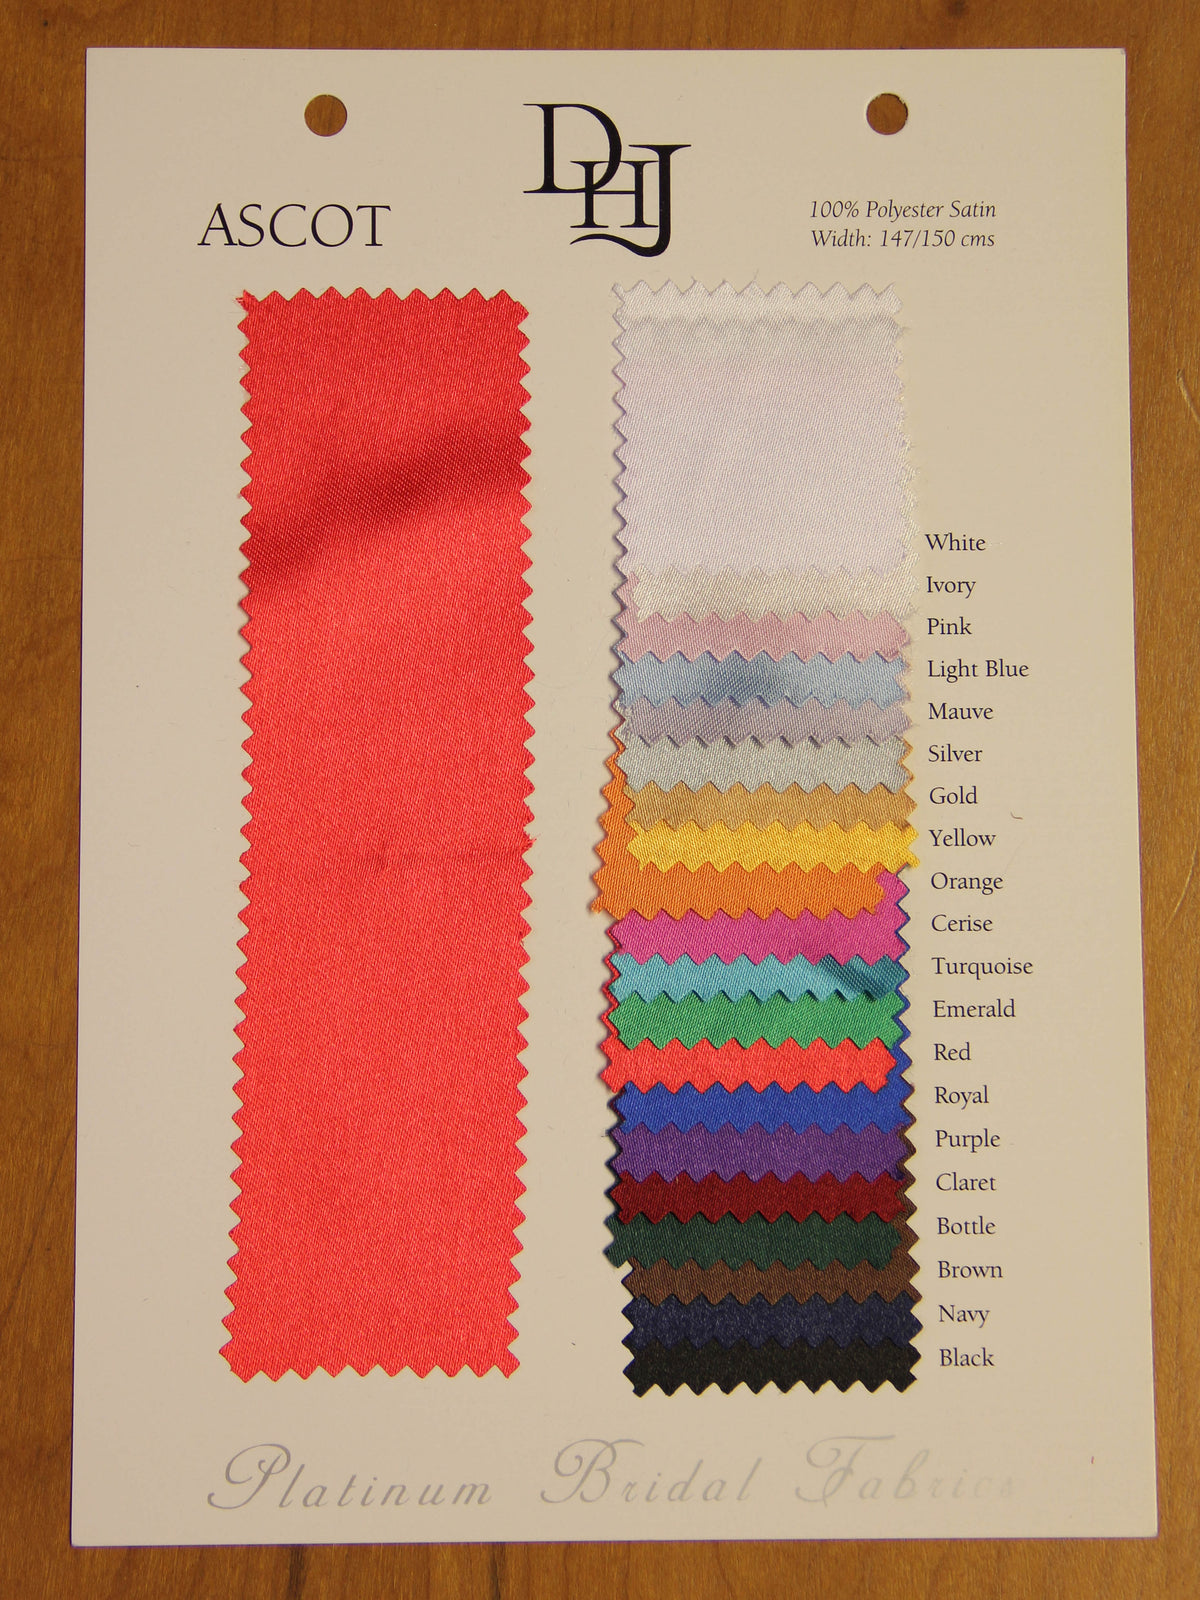 Sample Card of Polyester Satin – Ascot